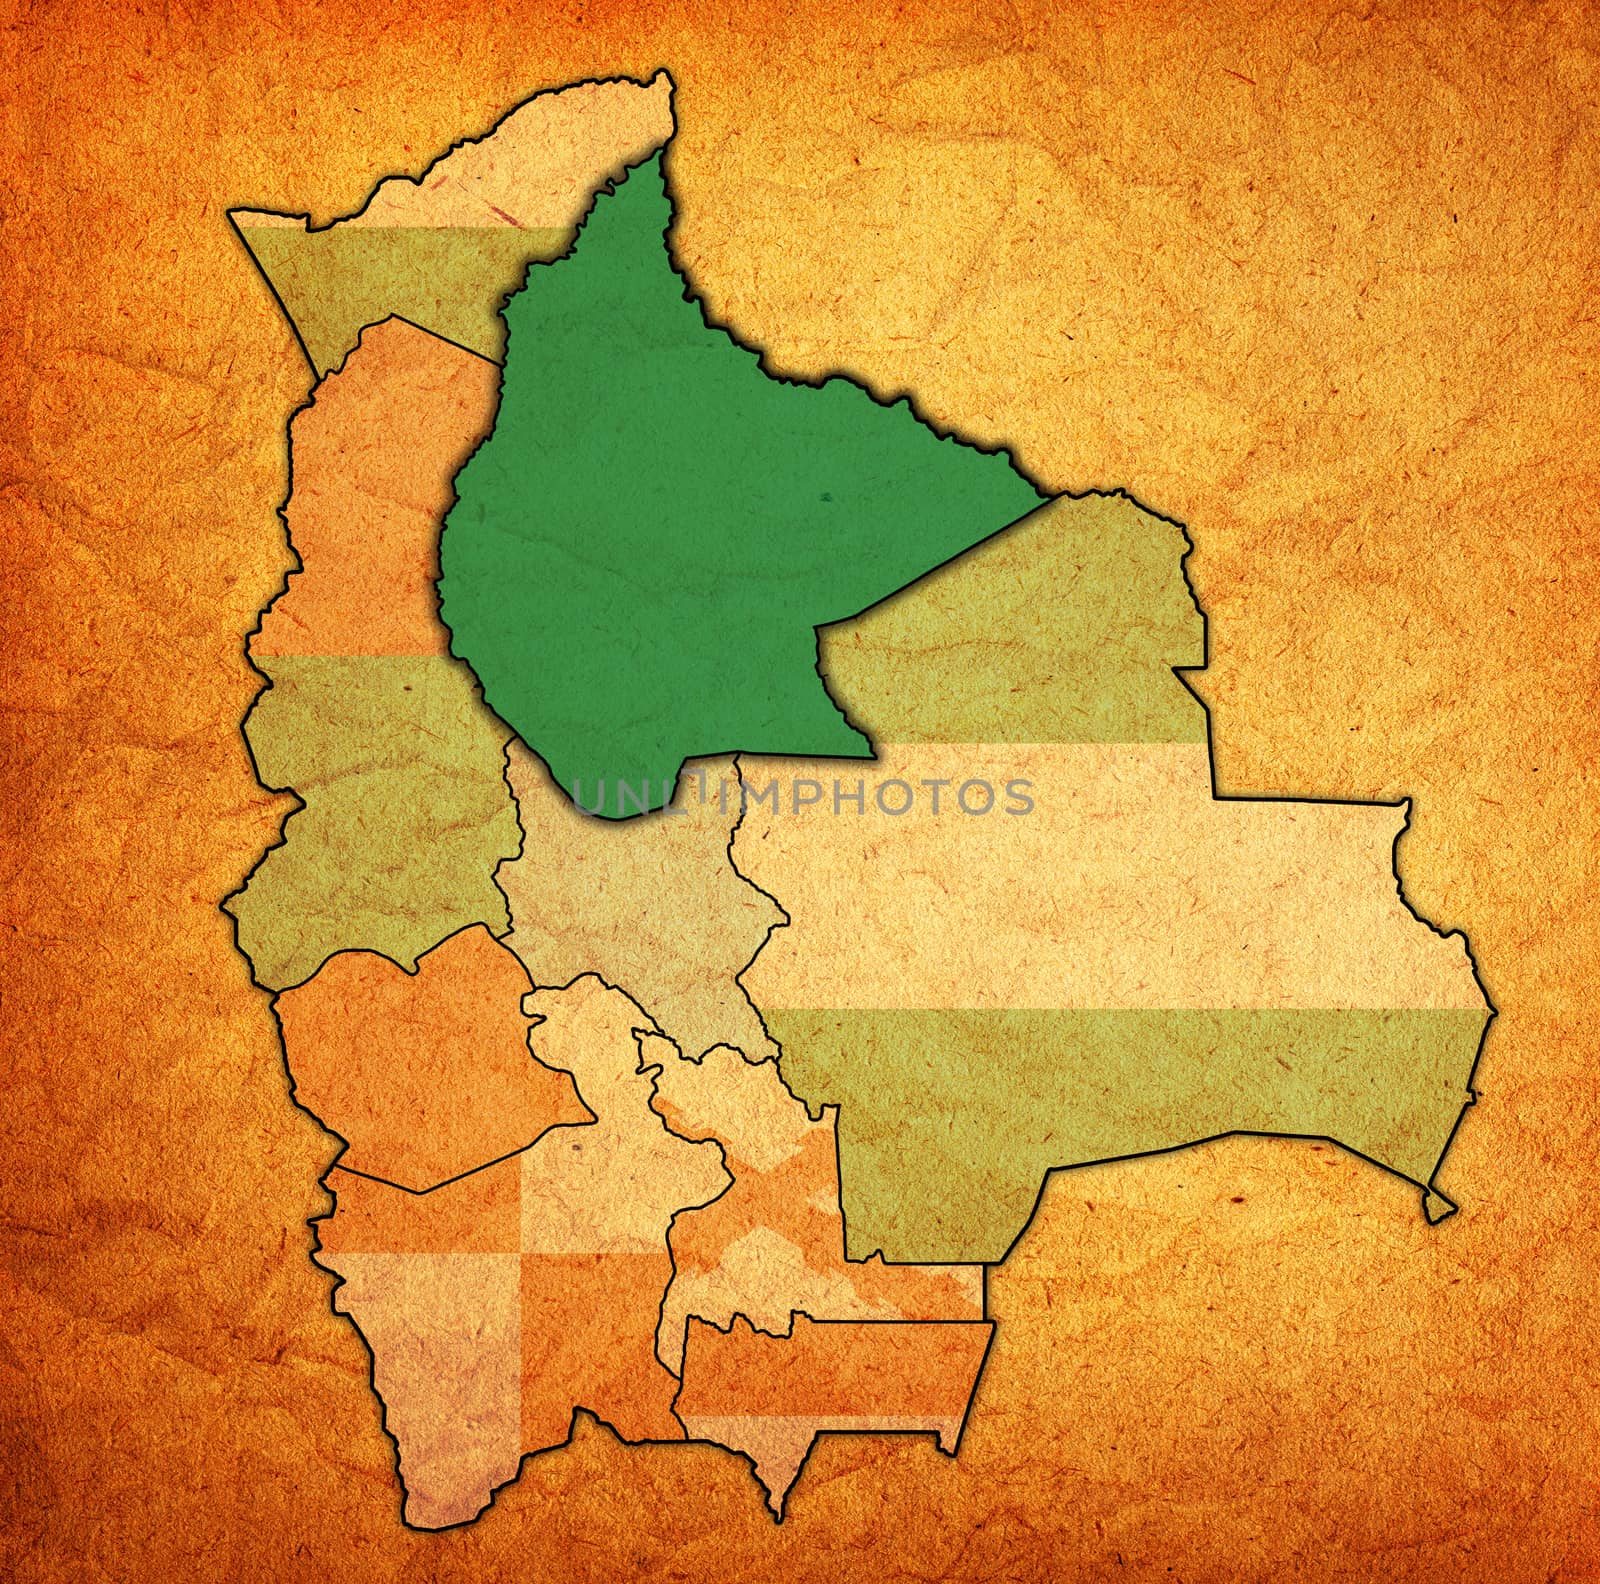 territory and flag of Beni region on map with administrative divisions and borders of Bolivia with clipping path